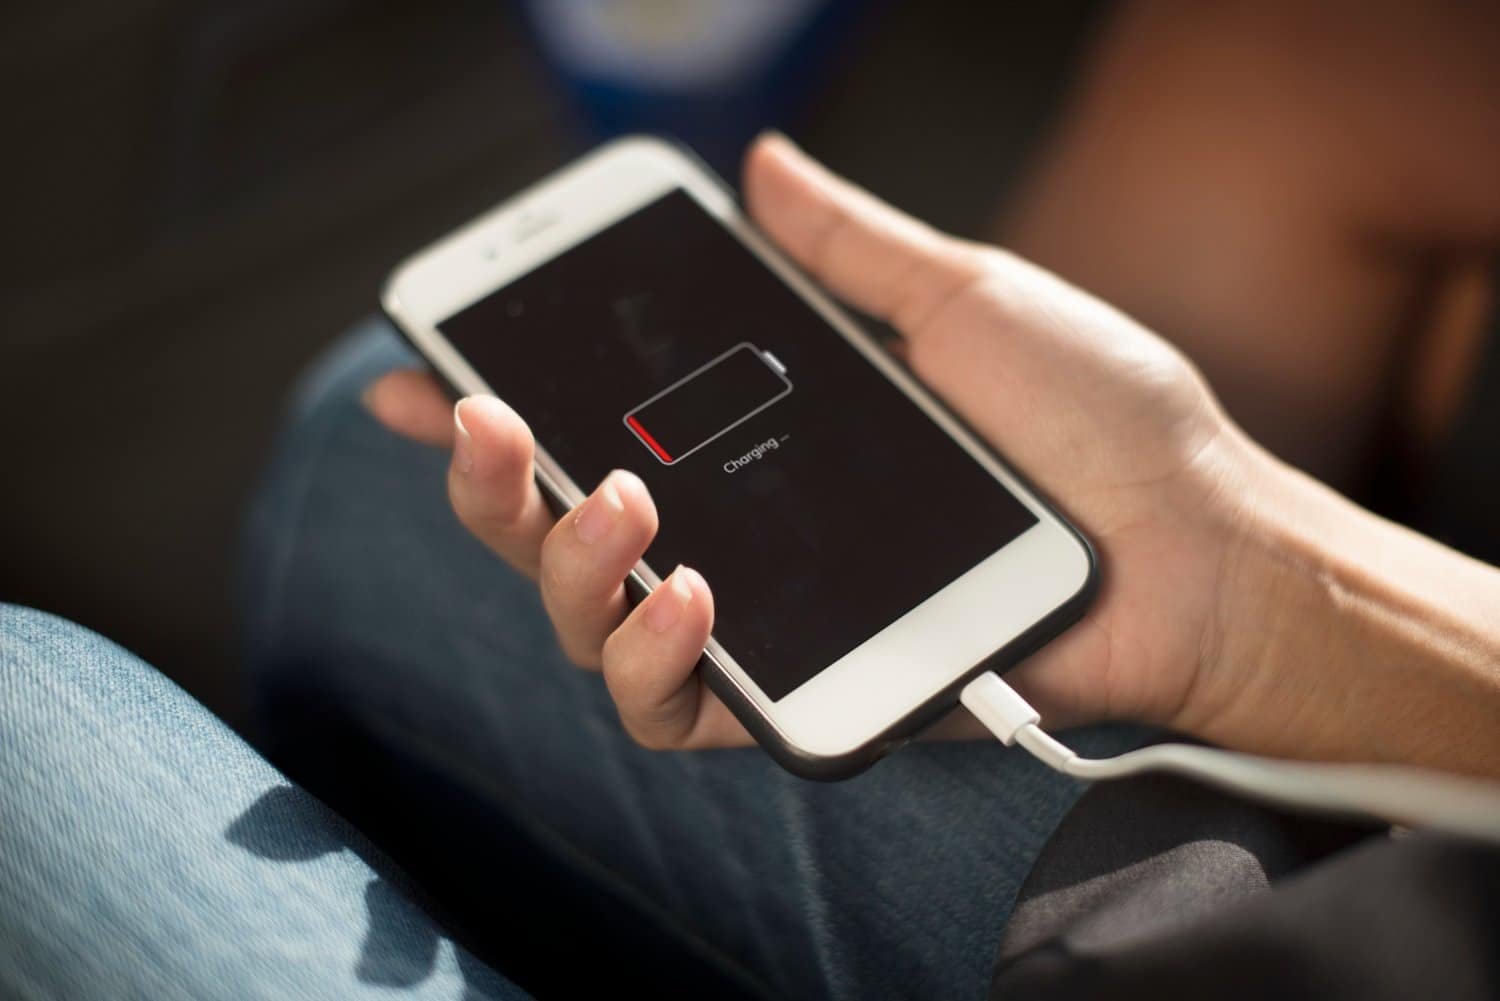 Tips for Extending Your Phone’s Battery Life